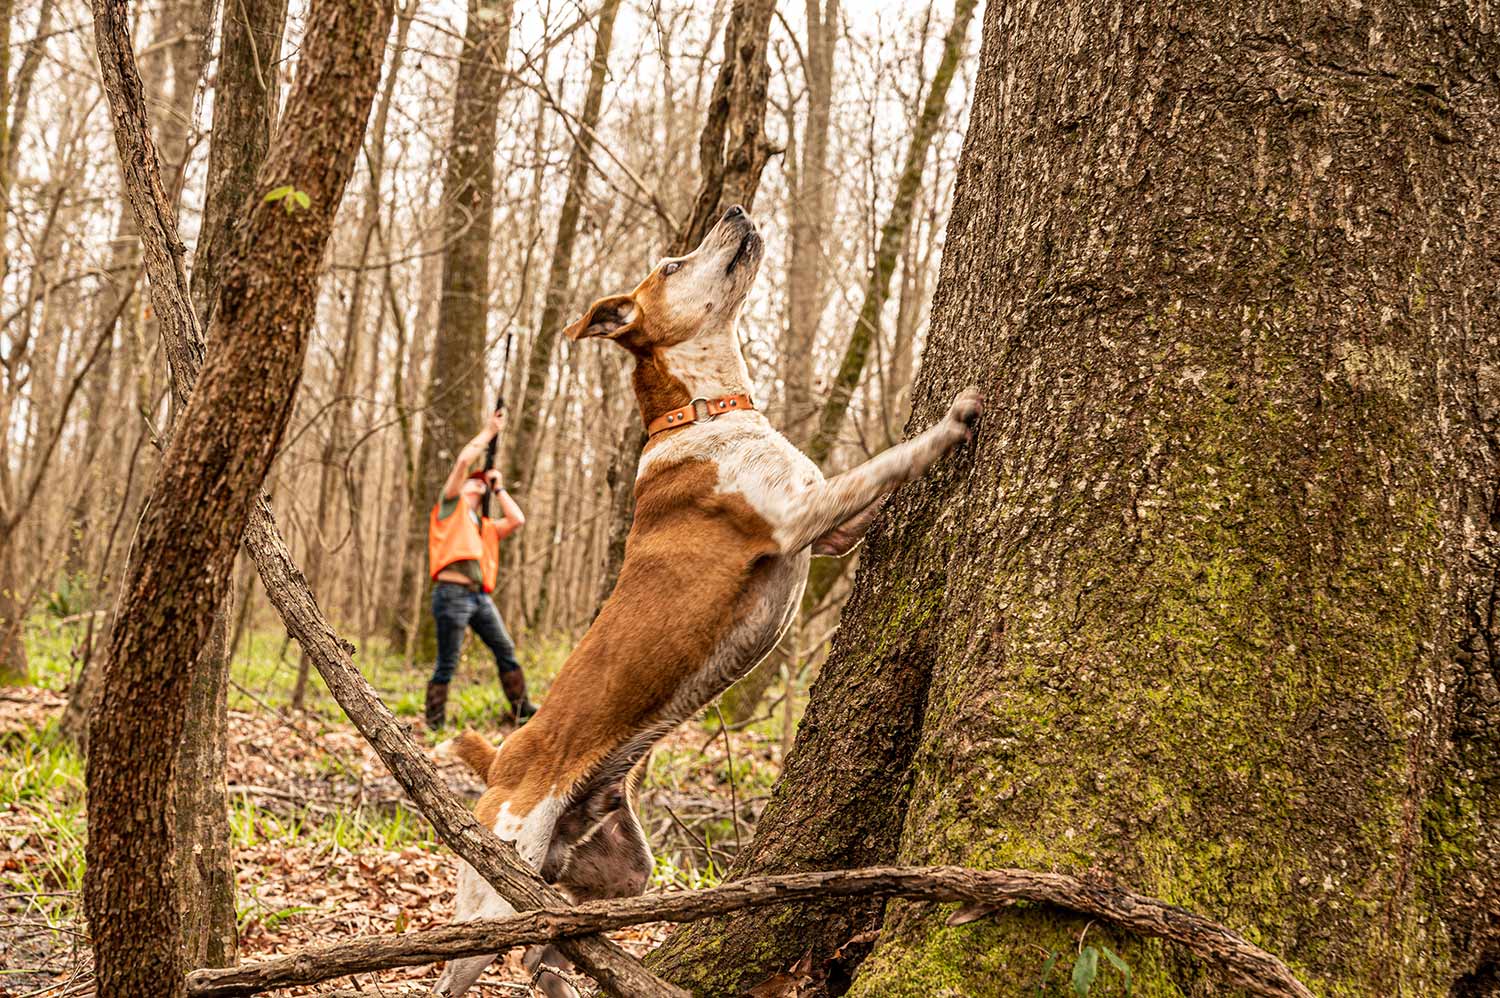 A squirrel hunting dog with front paws on the tree.